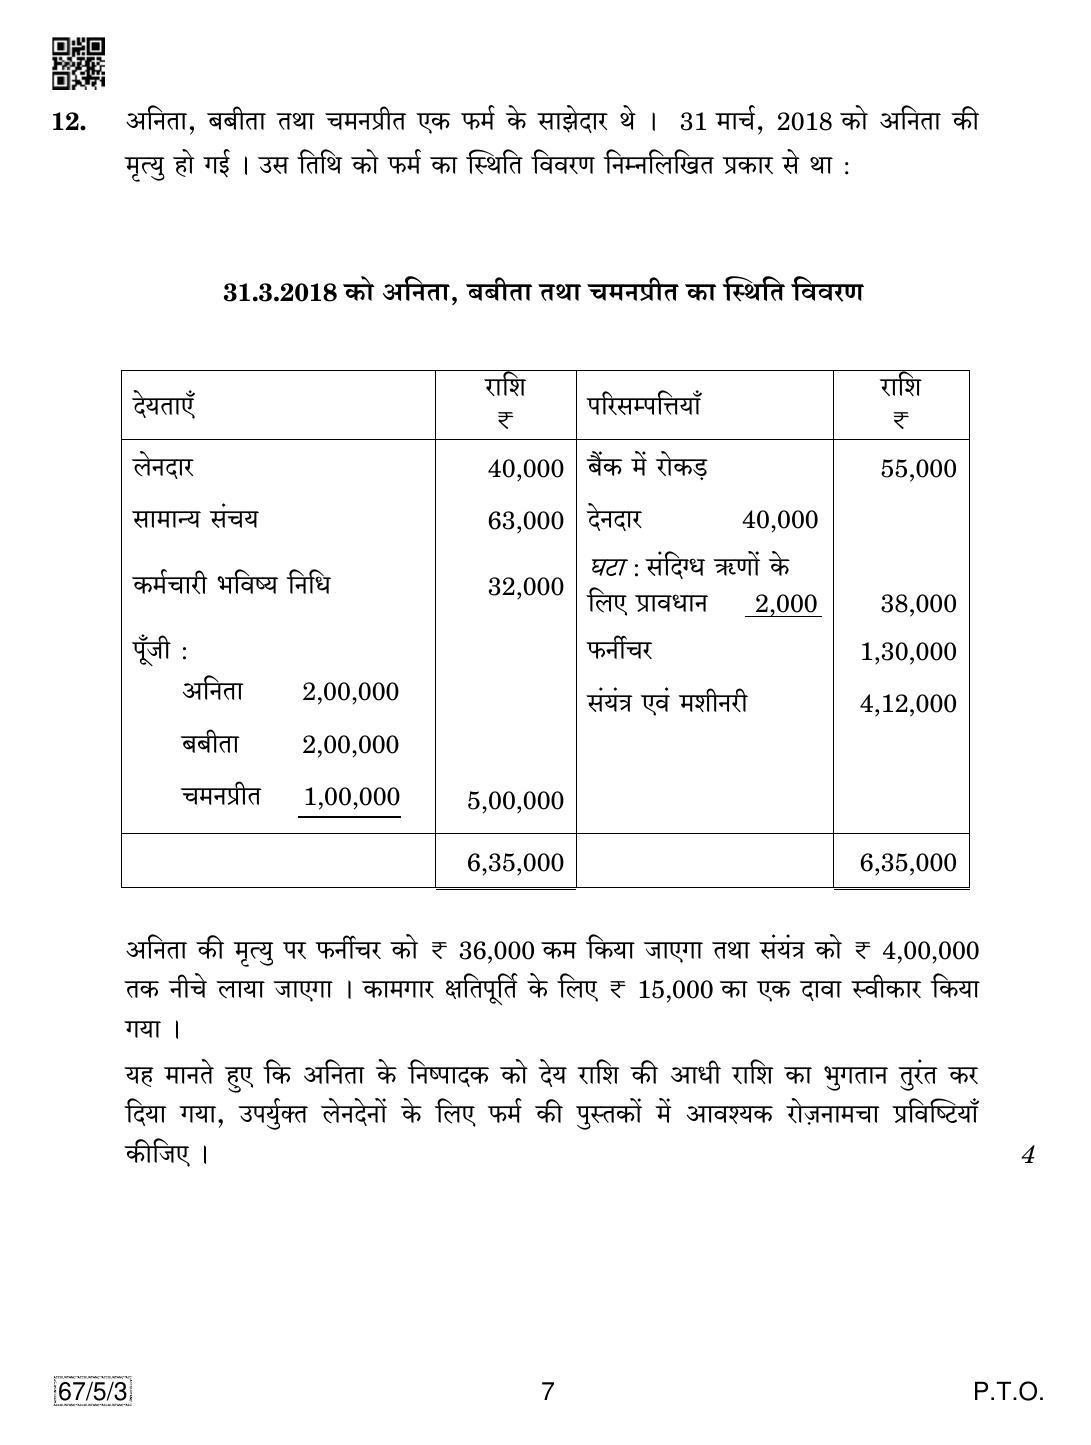 CBSE Class 12 67-5-3 Accountancy 2019 Question Paper - Page 7